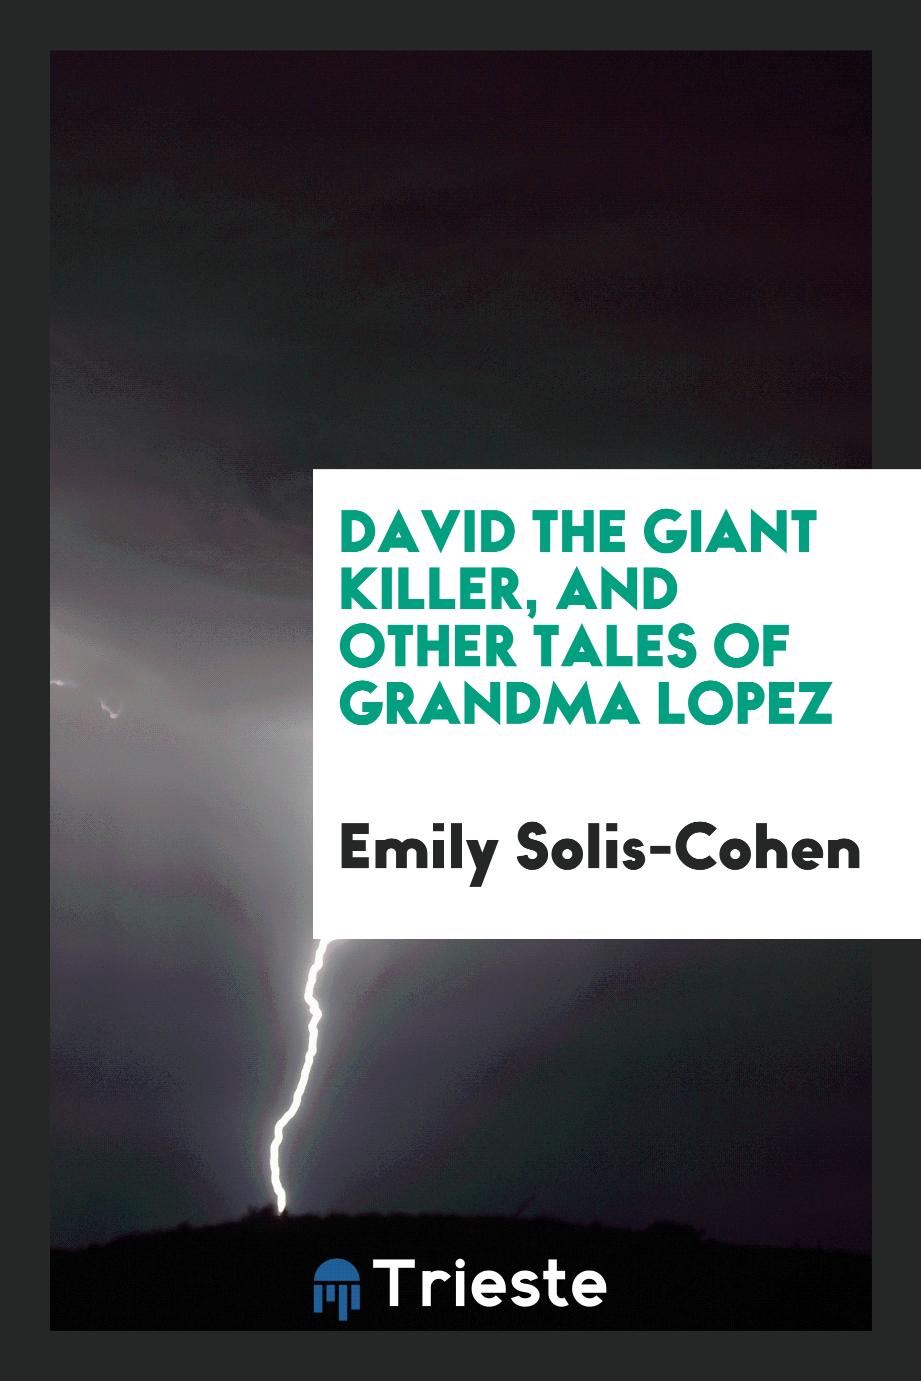 David the giant killer, and other tales of Grandma Lopez